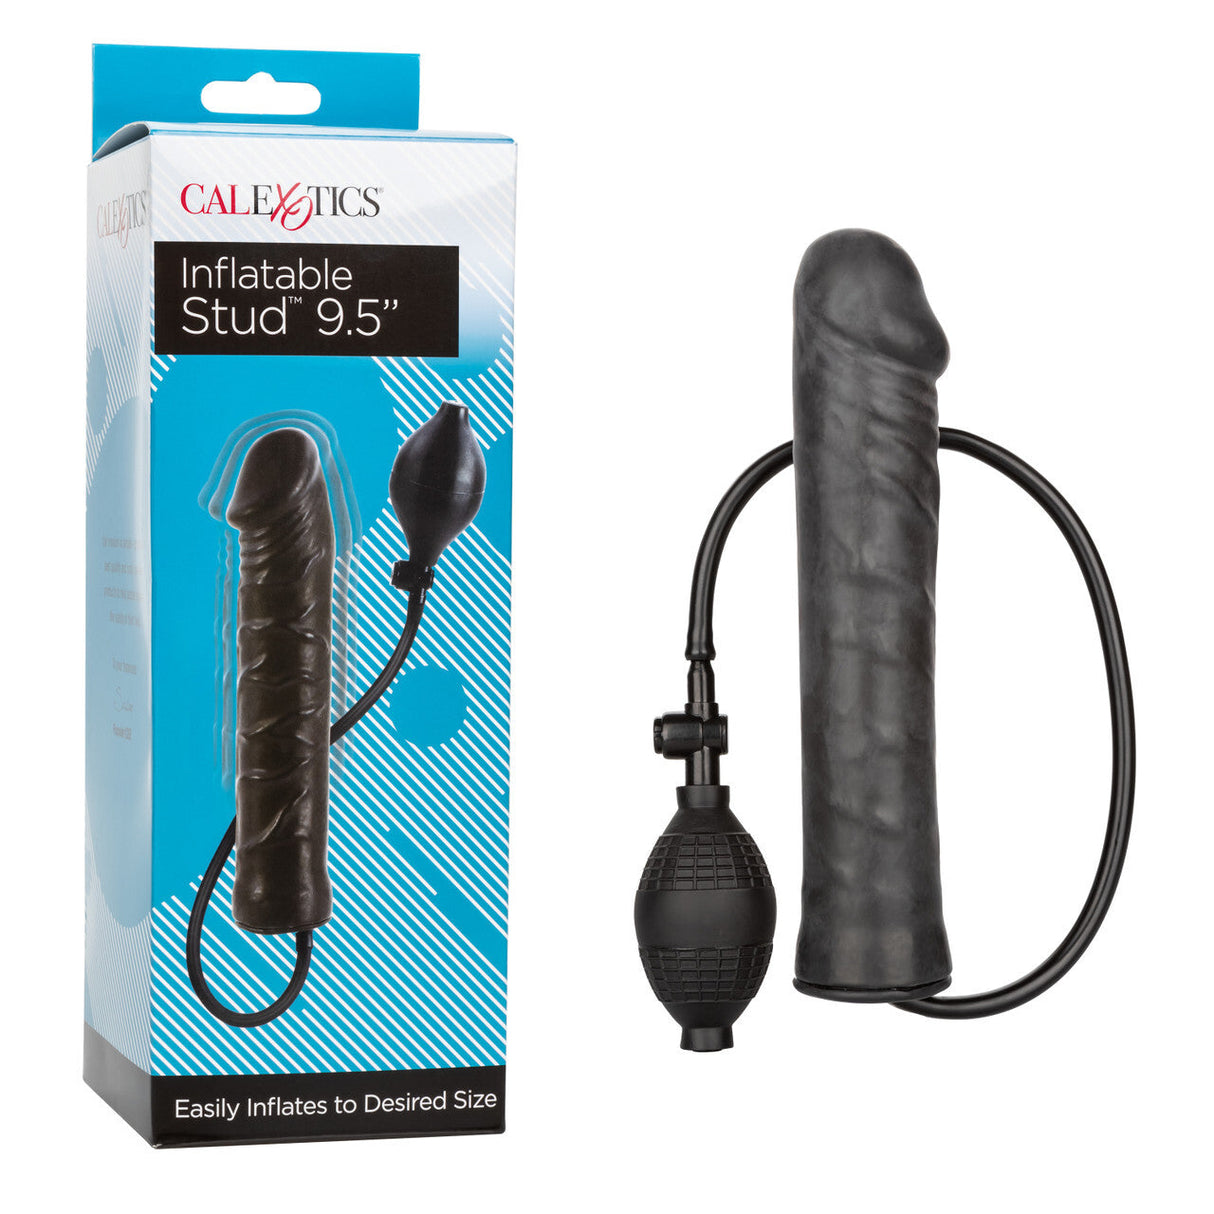 Inflatable Stud 9.5 Inch Dildo